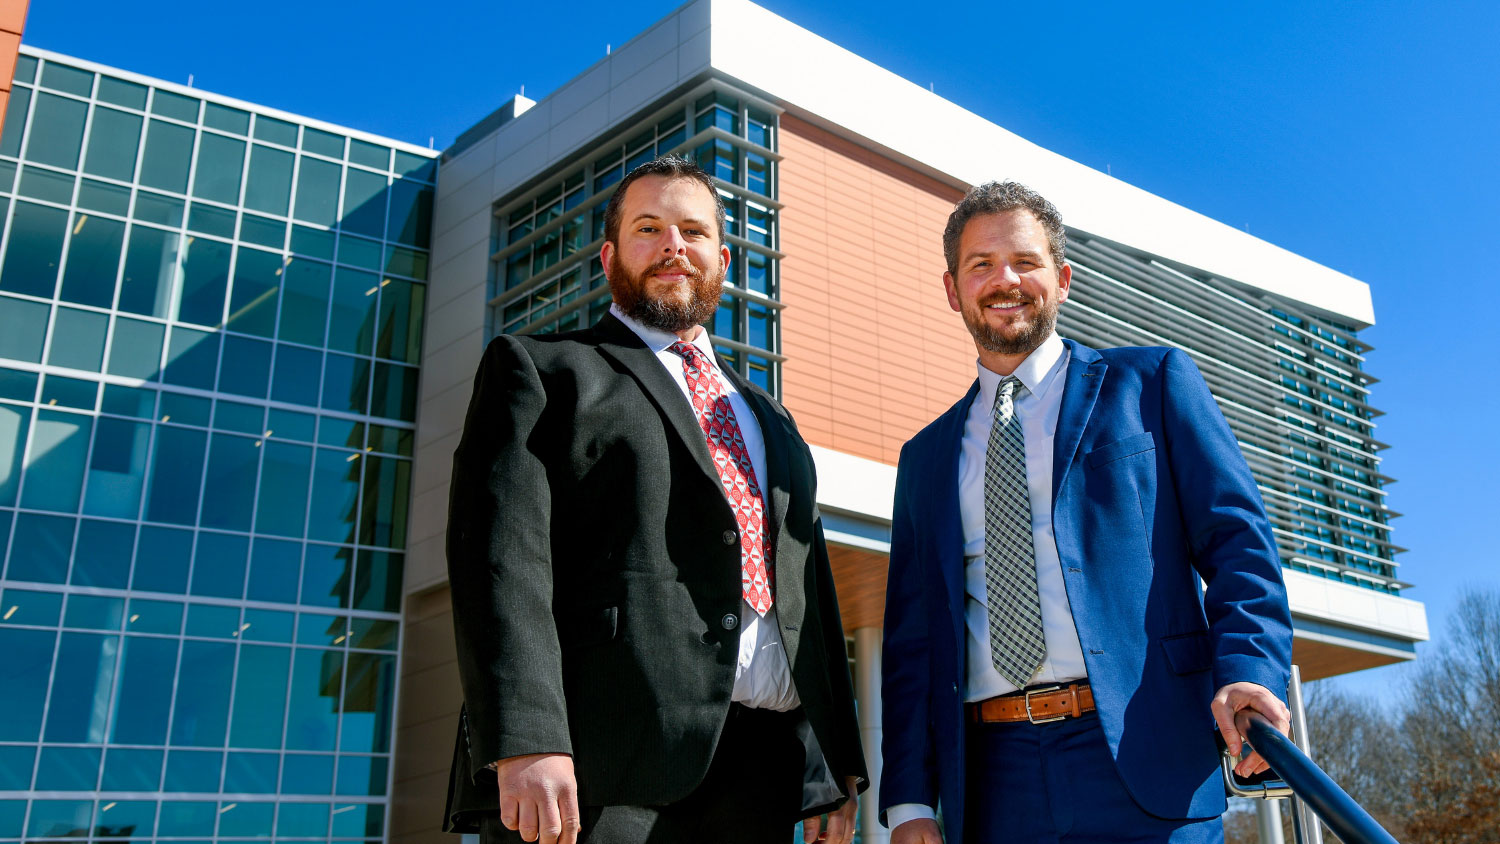 John Radcliff (left) and John Holshouser (right) of JTI in front of the Plant Sciences Building